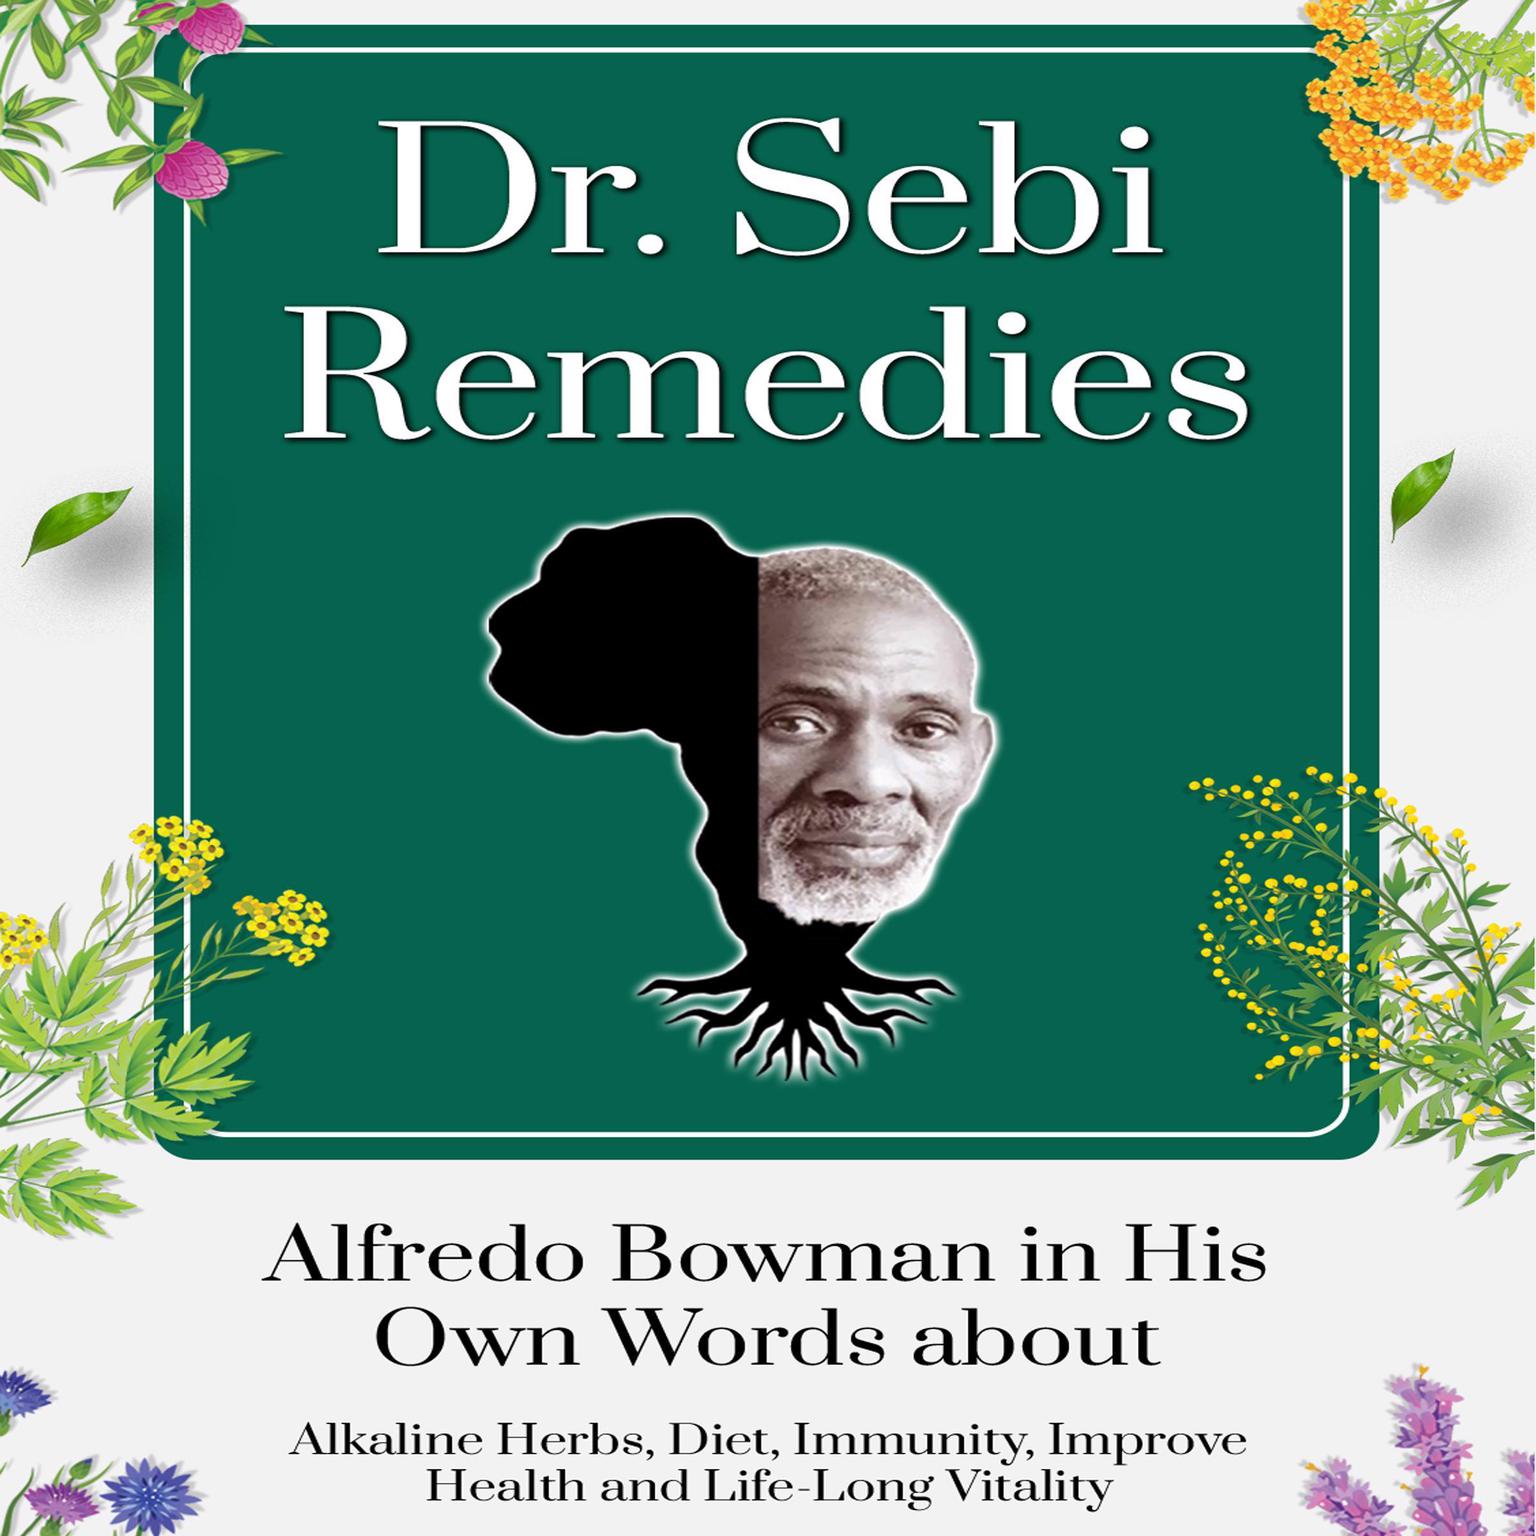 Dr. Sebi Remedies: Alfredo Bowman in His Own Words about Alkaline Herbs, Diet, Immunity, Improve Health and Life-Long Vitality Audiobook, by Alfredo Bowman